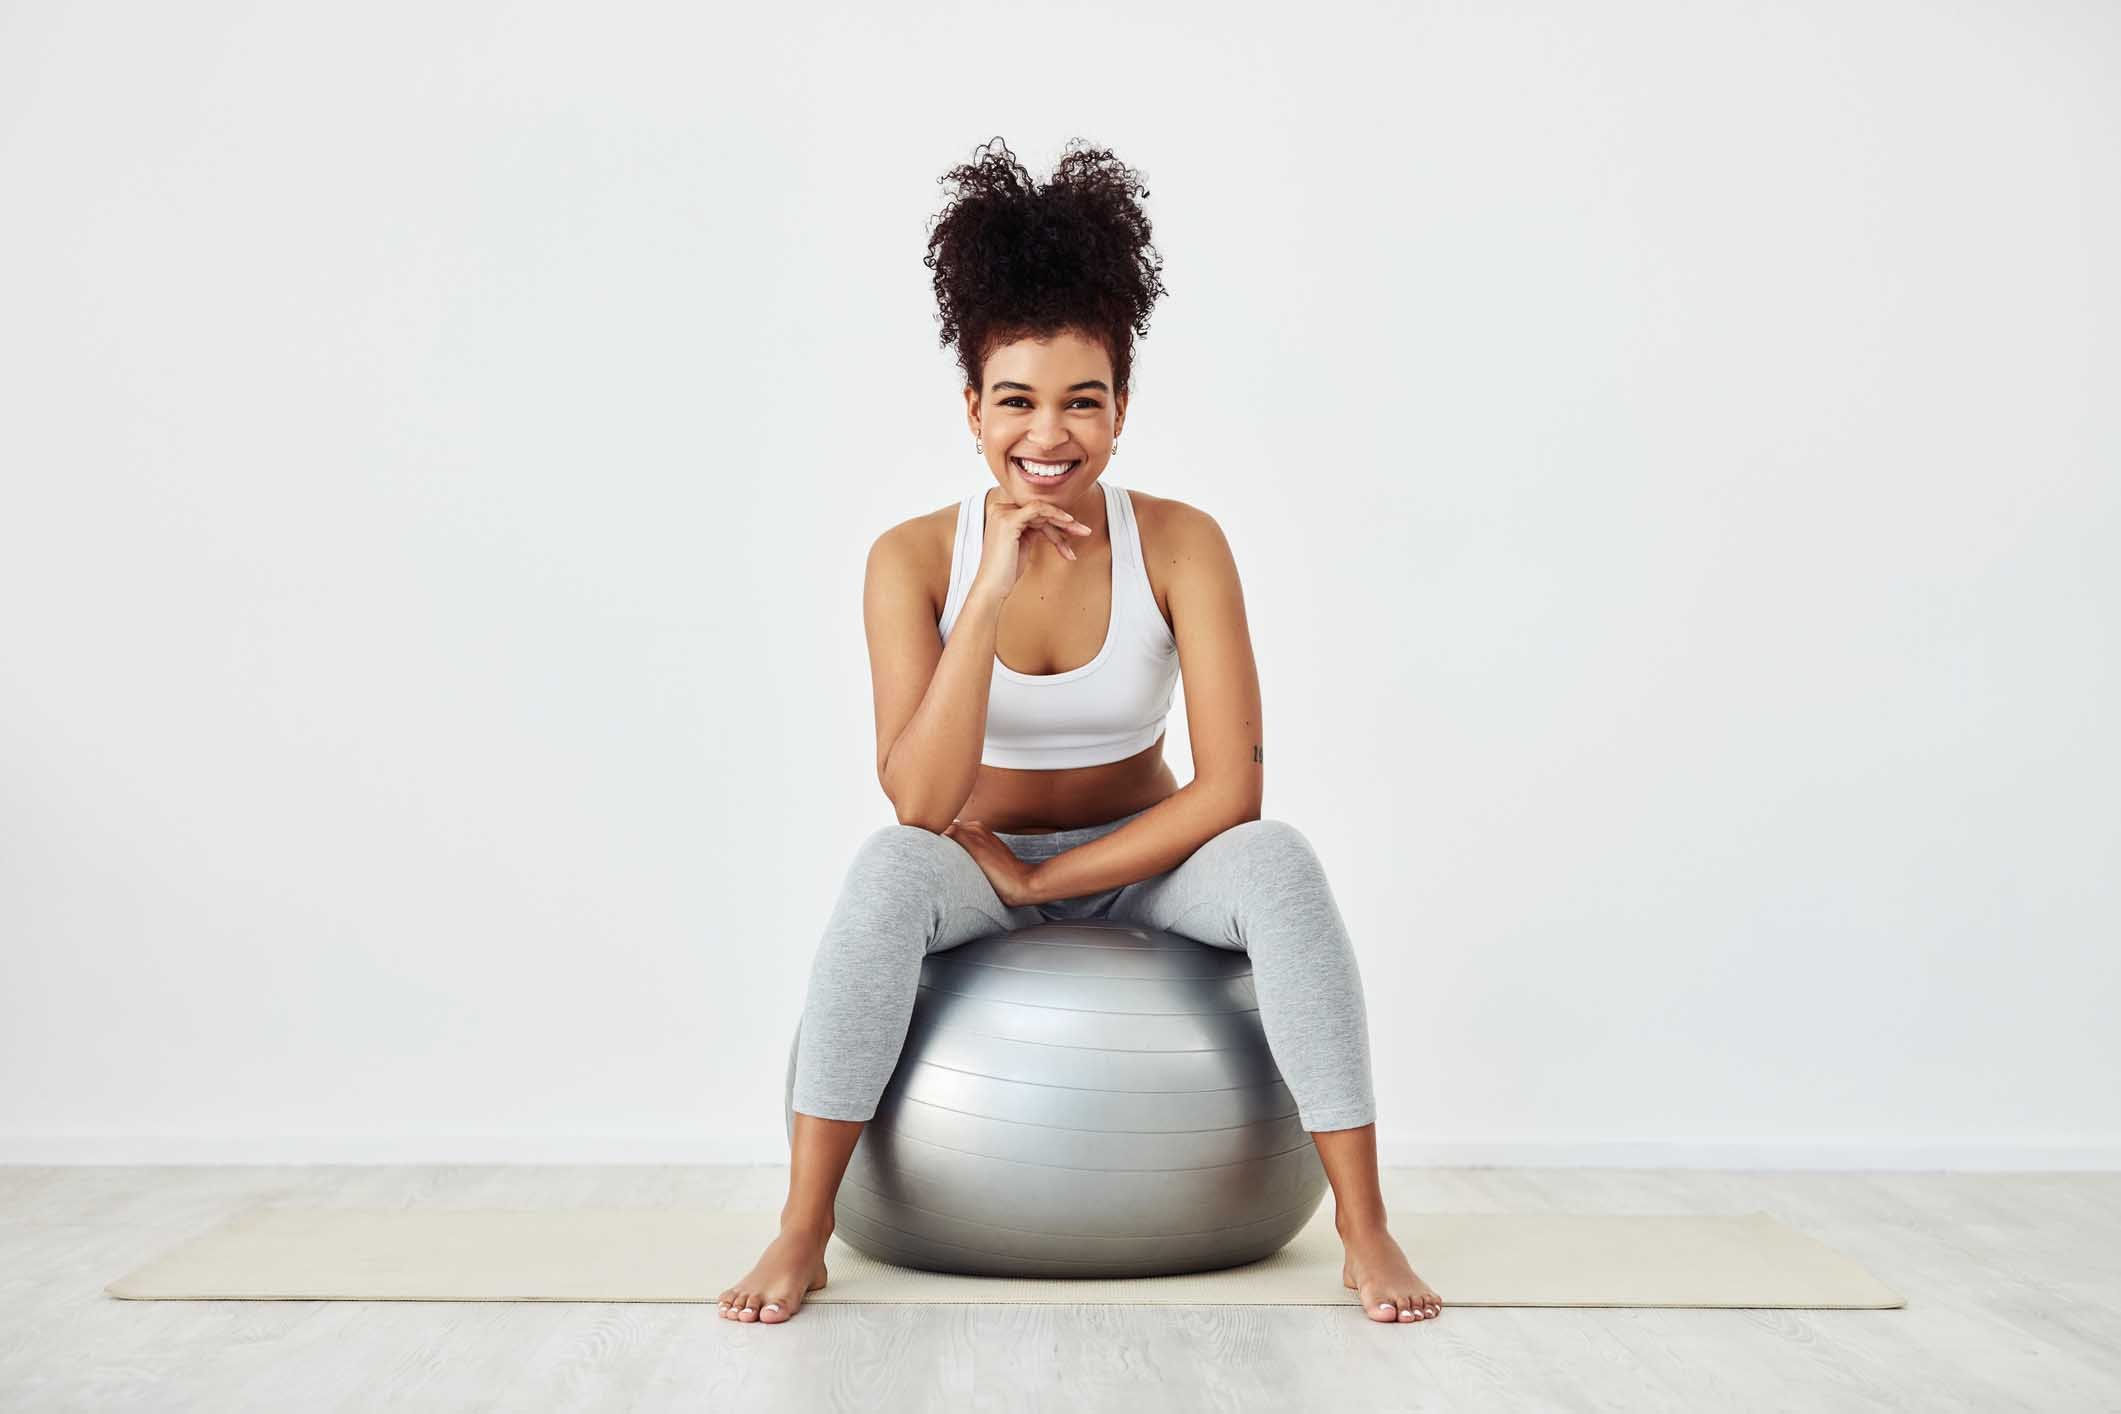 7 Deep Core and Pelvic Floor Exercises to Start Doing Now